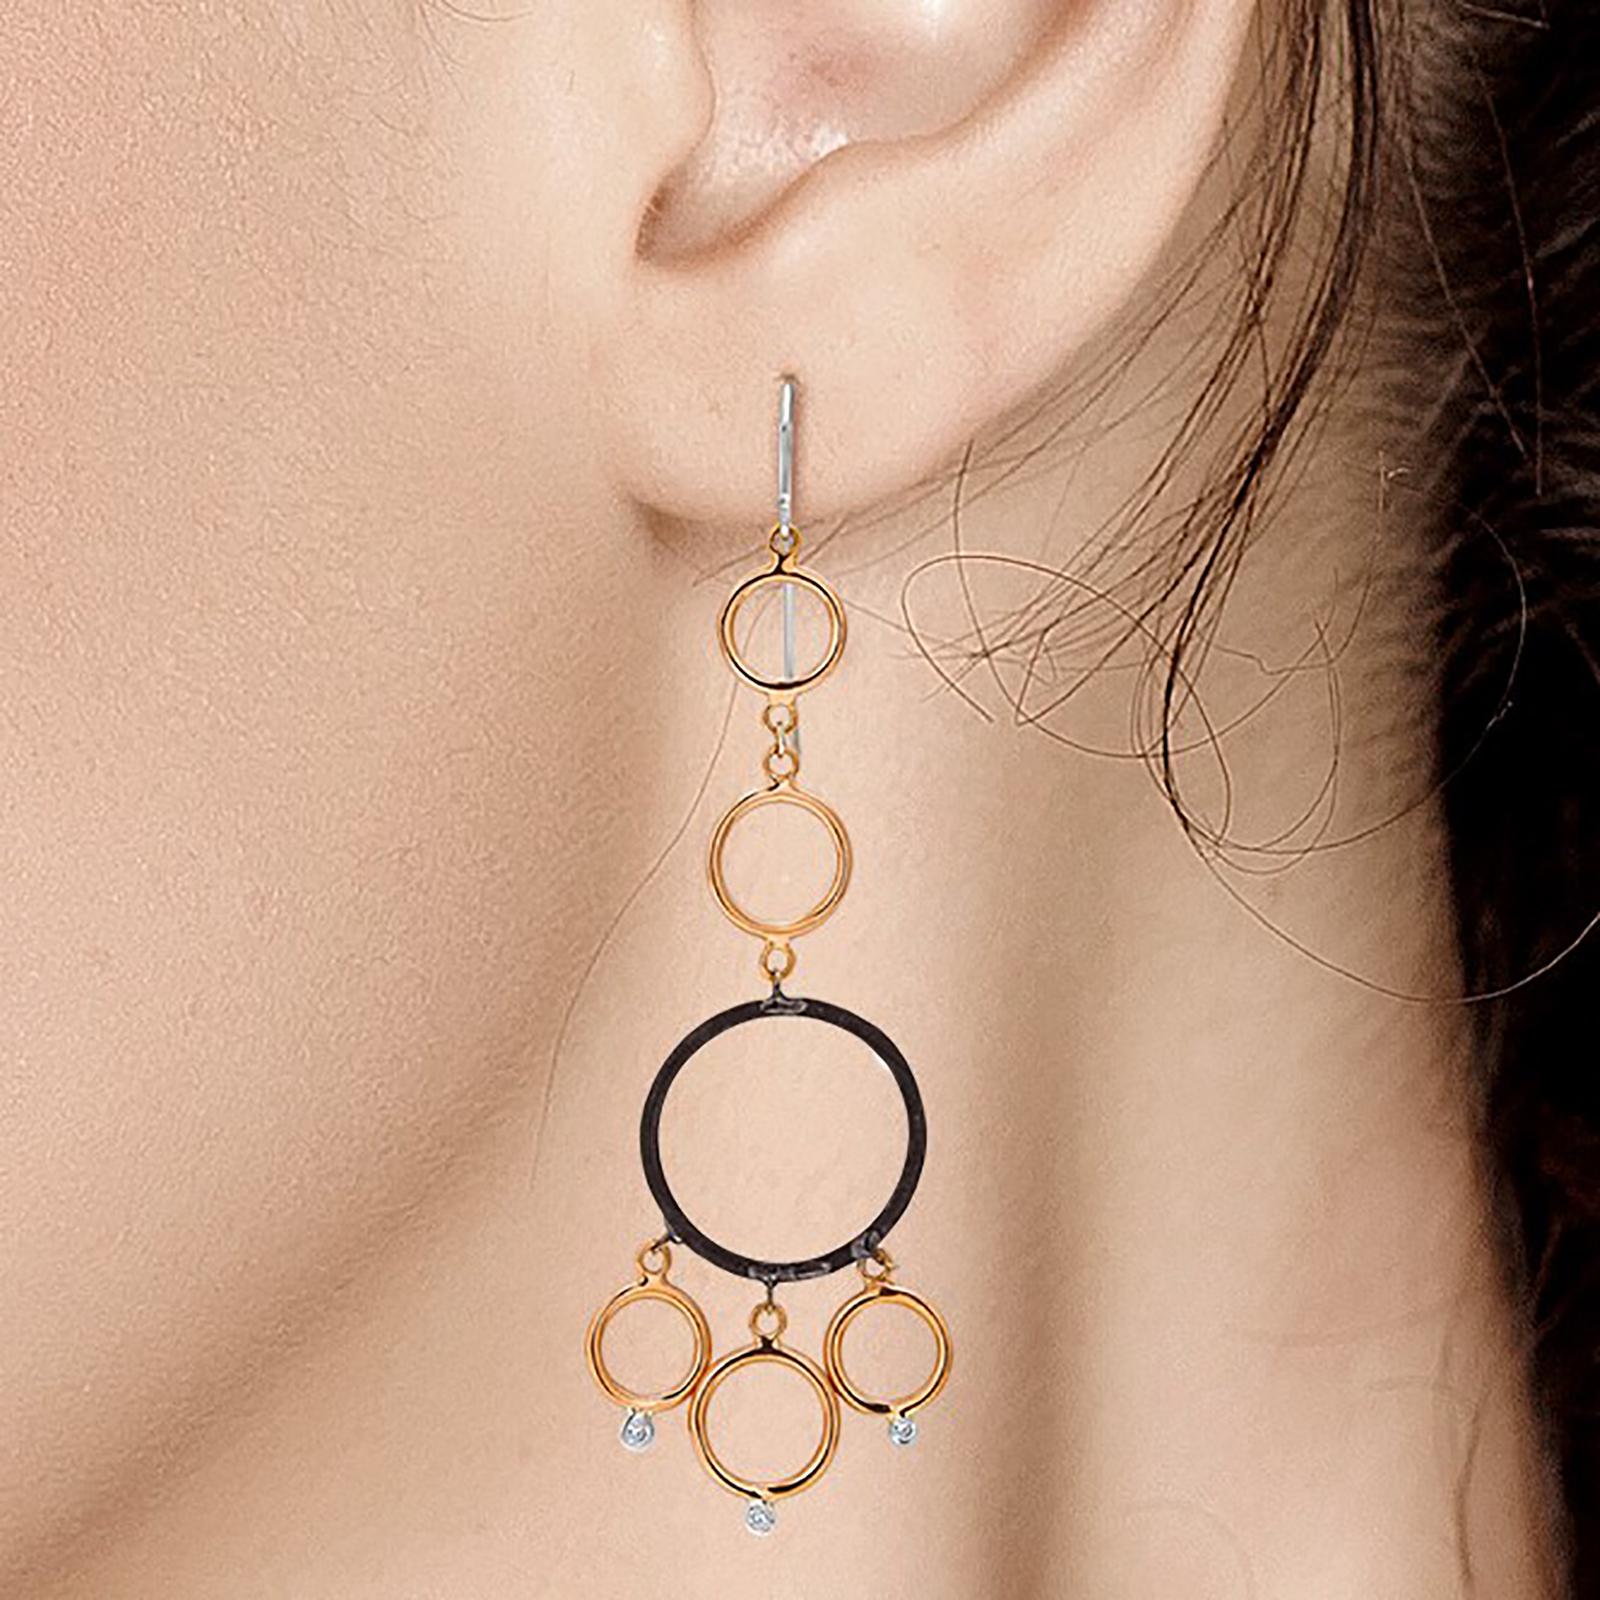 Fourteen karats rose and white gold circles with bezel-set diamonds 
Three-inch long earrings
Two Blacken silver circles  
Diamond weight 0.18 carats
14 karat gold large hoops.
New Earrings
The latest and innovative fashion collections have been